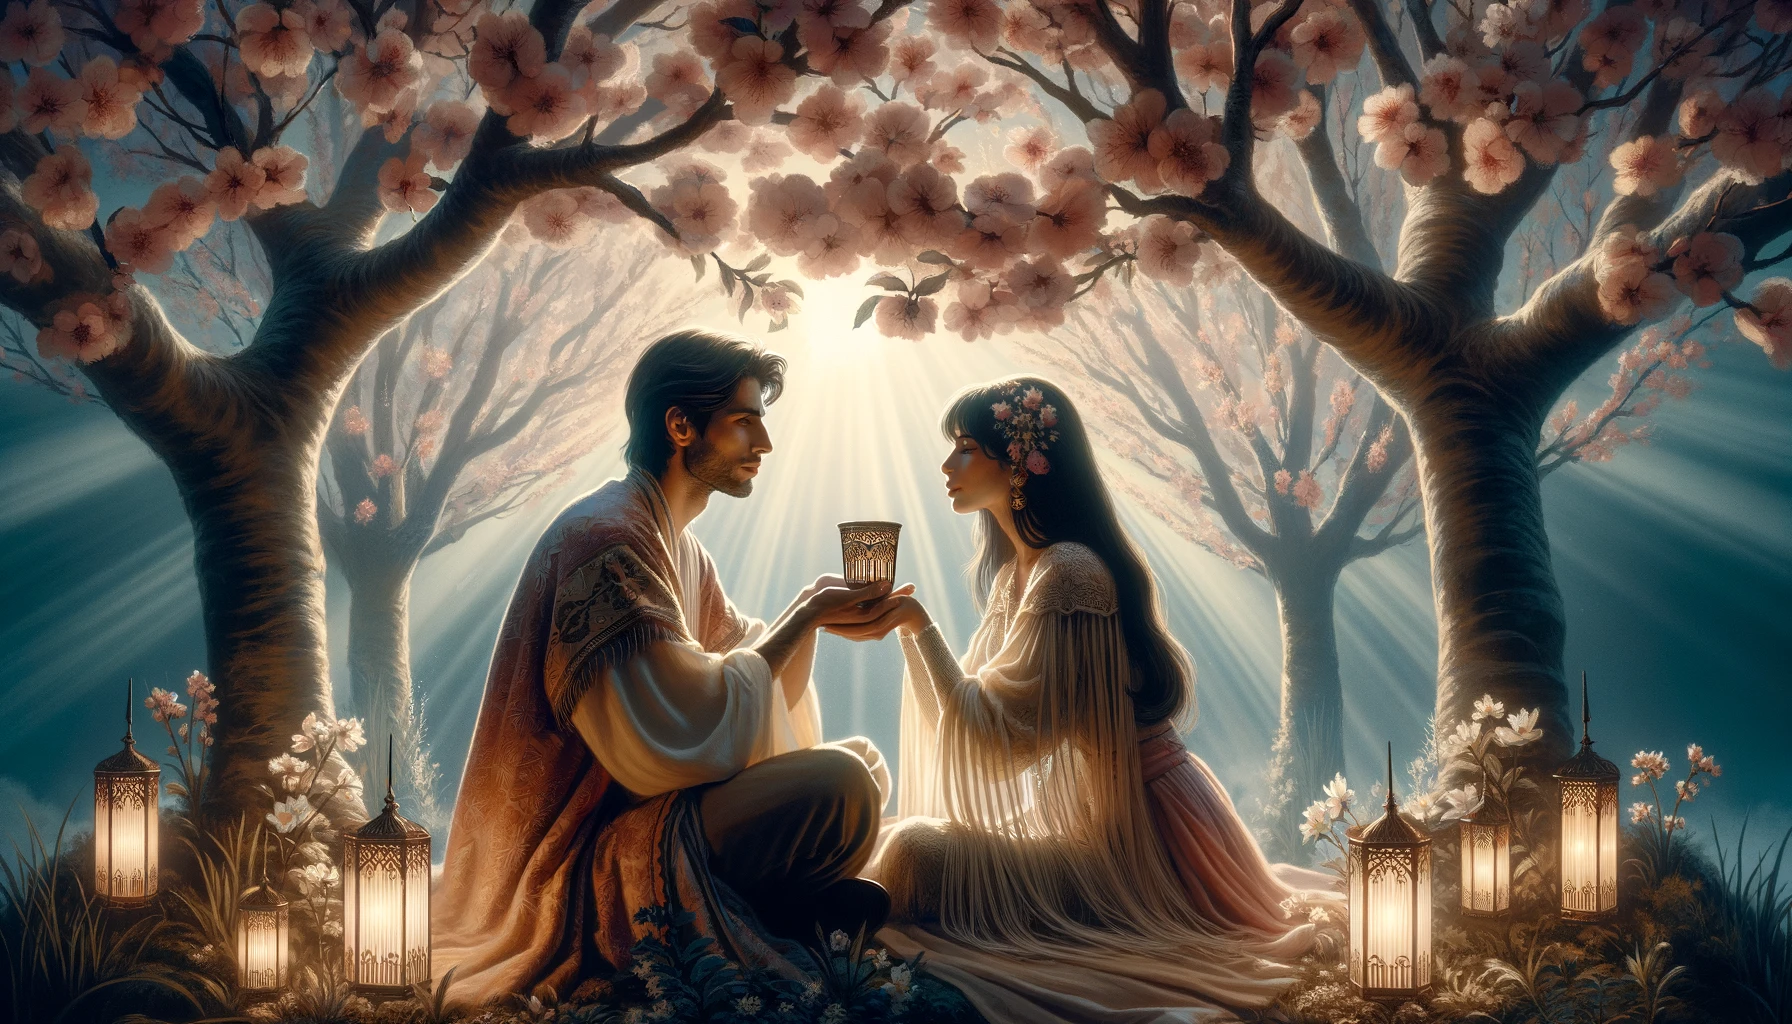 A serene setting portraying the harmonious union and emotional connection from the Two of Cups tarot card. A couple sits under a blooming tree their